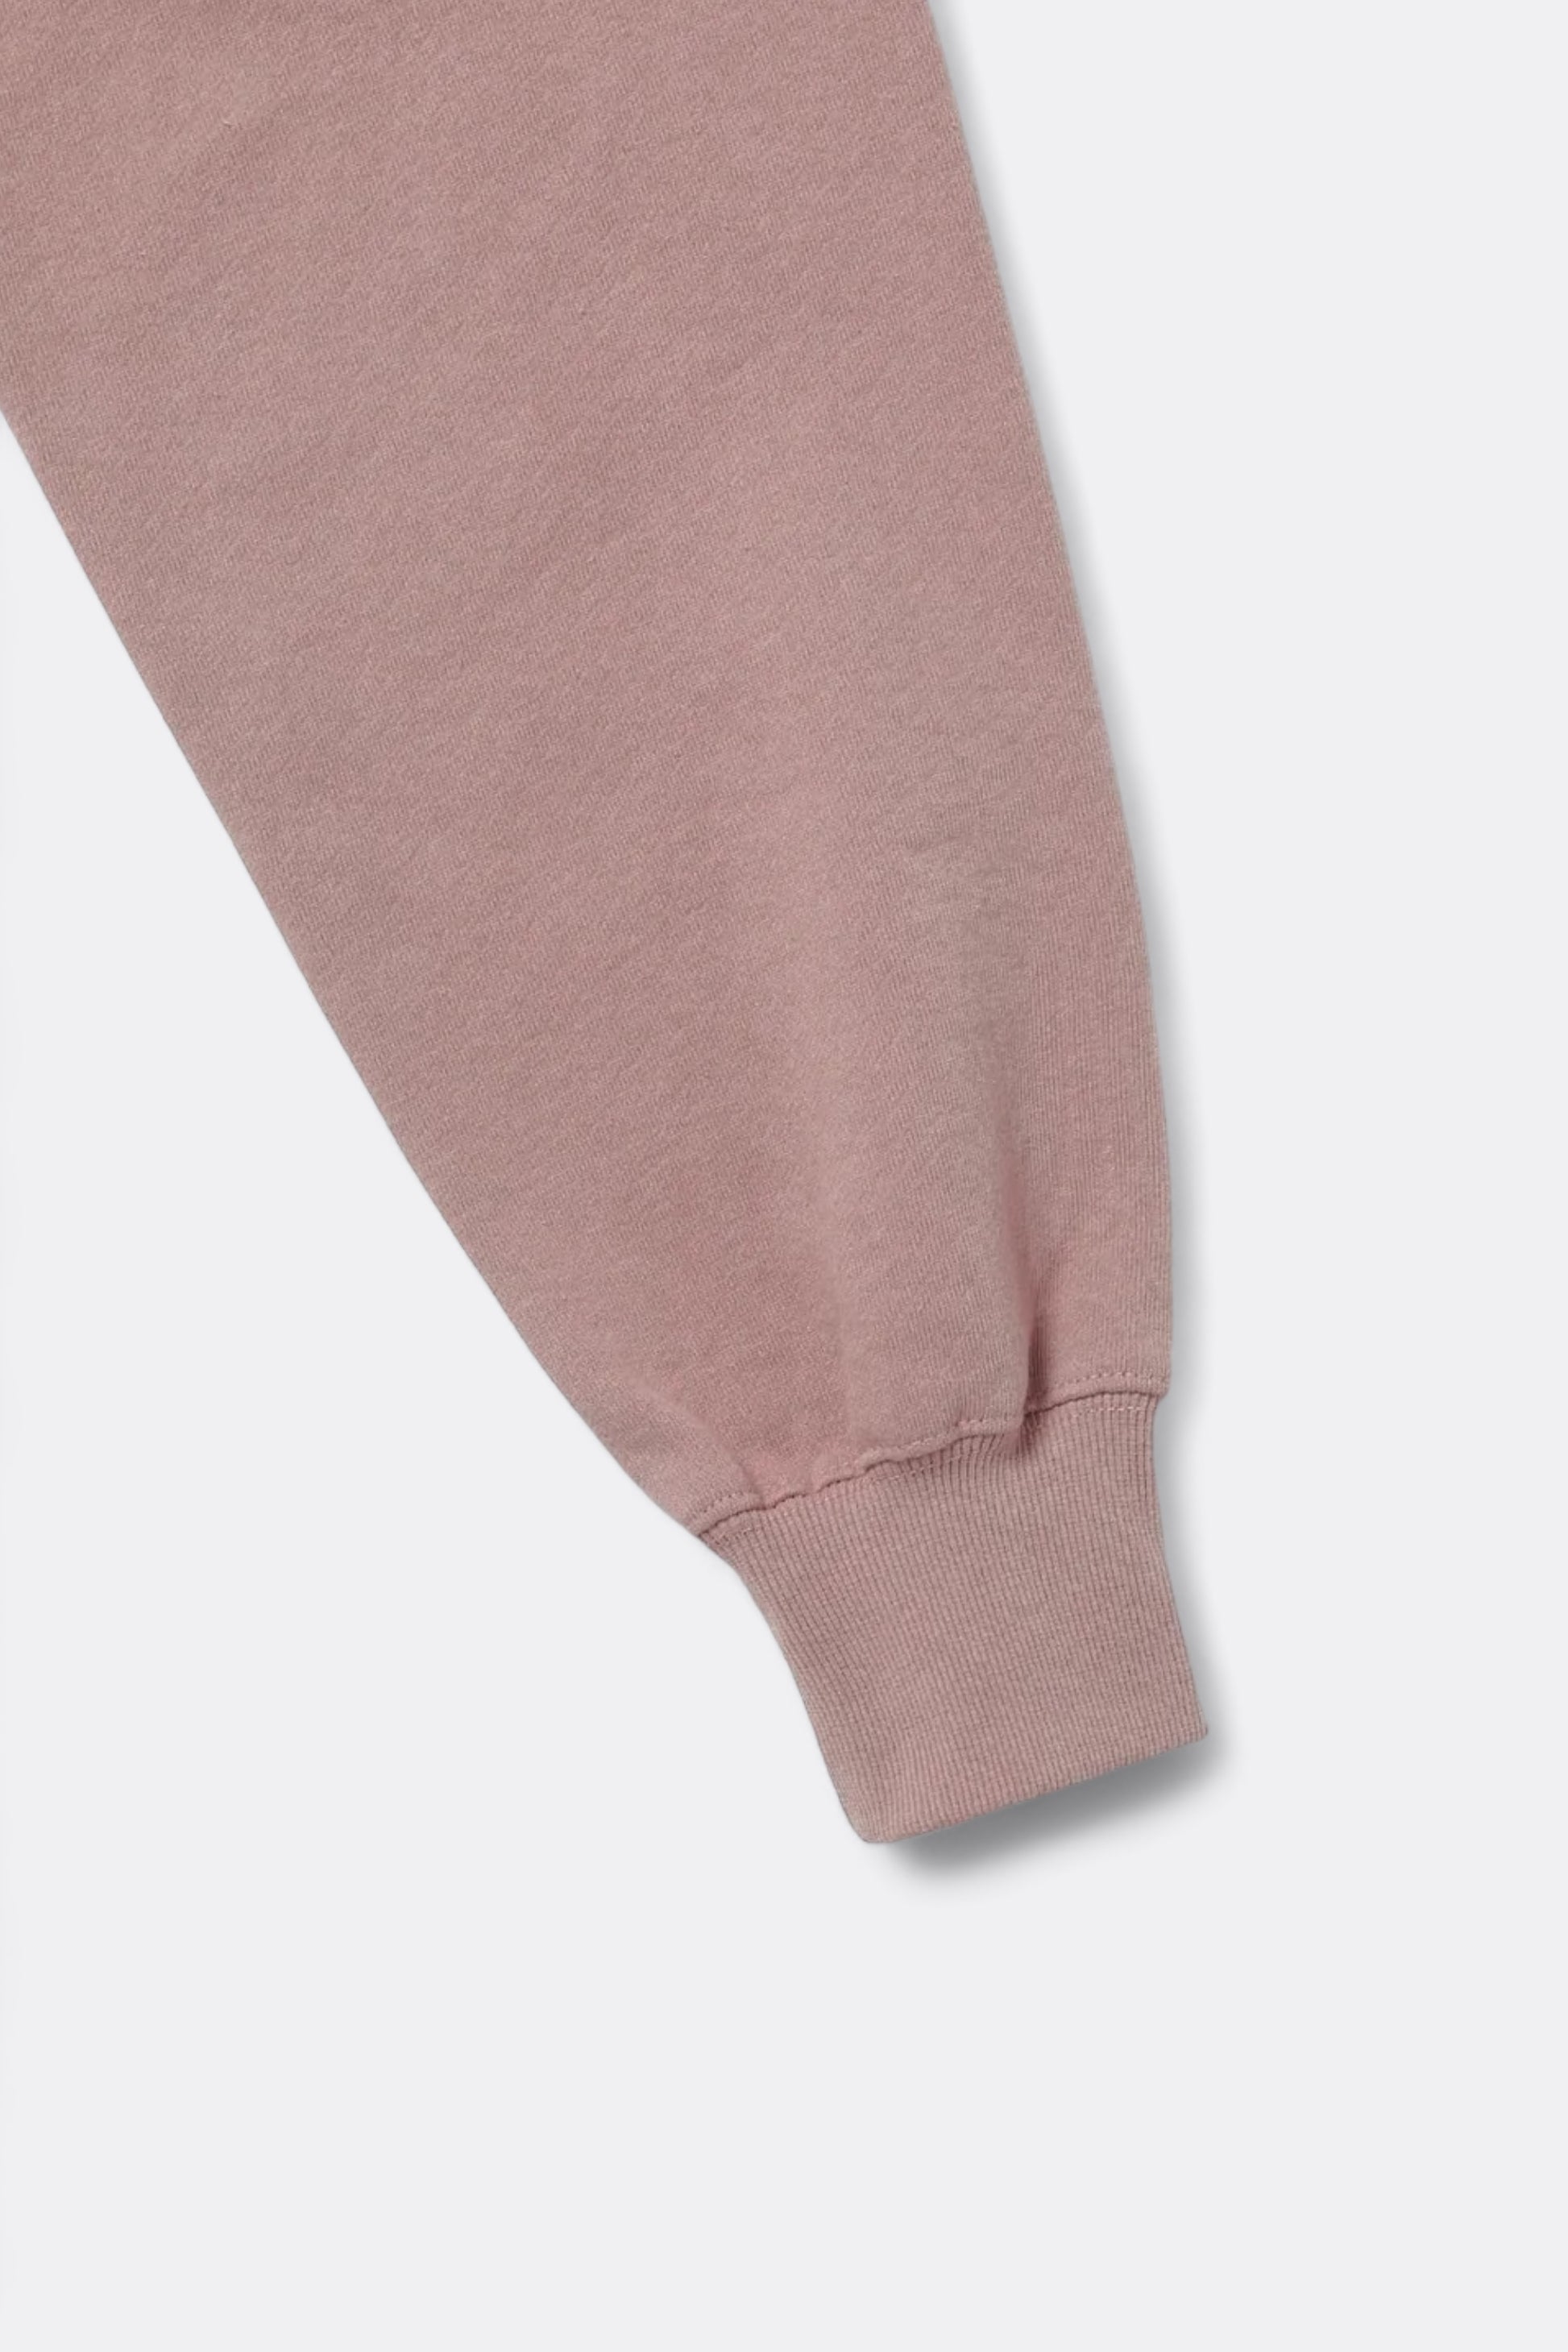 thisisneverthat - T-Logo LT Hoodie (Dusty Pink)